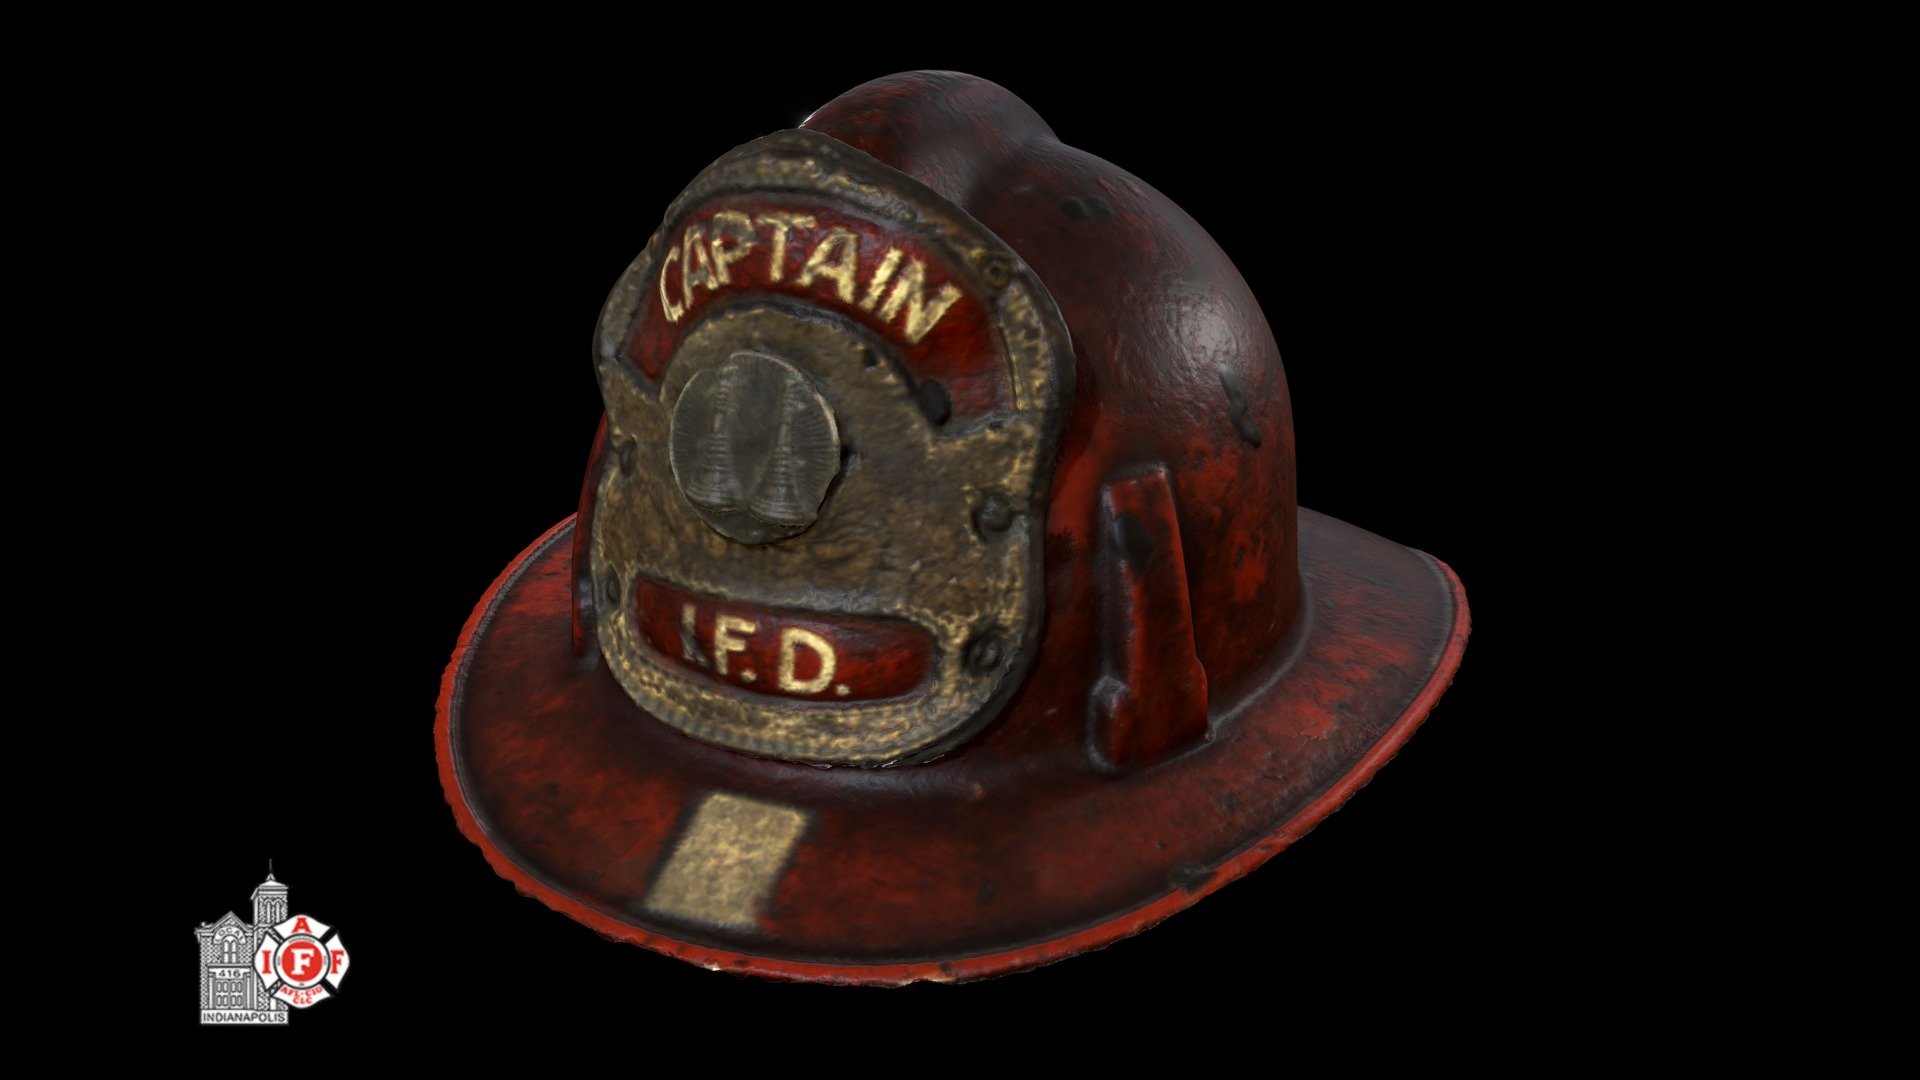 The helmet belonged to Wilson (Jake) Crawford. He had 30 years of service. Many of those years was at Station 32 in Broad Ripple (which is now on the historic register). He went up through the ranks to Captain. He was chauffeur for Jesse (Boots) Hutsell (Division Fire Chief) around 1970 and then spent his remaining years at Station 14, near the Children’s Museum.  He passed away suddenly the year he was to retire (Sept. 1979).

This item was 3D scanned using a Creaform Go Scan 50.

For more information about this object, feel free to visit: https://www.visitindy.com/indianapolis-firefighters-museum-historical-society - Crawford Helmet - Download Free 3D model by Connections XR (@connectionsxr) 3d model